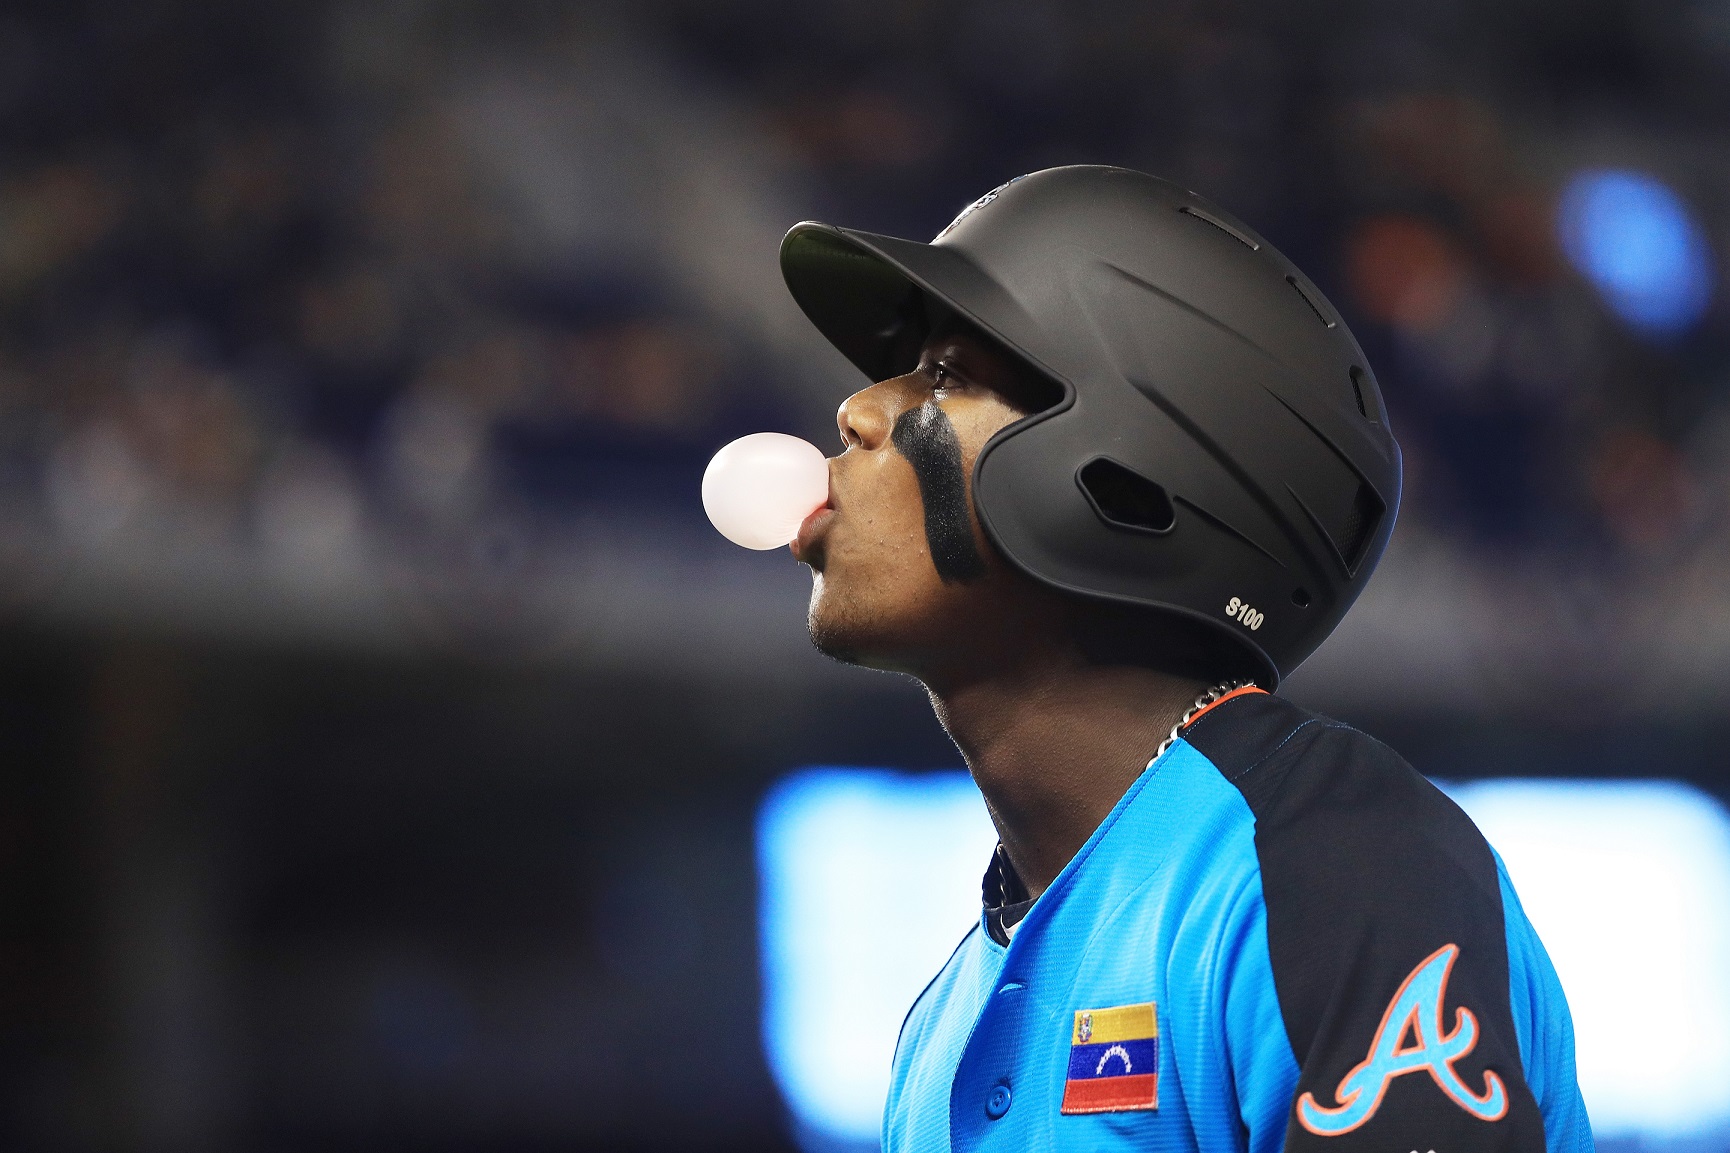 Acuna, Albies are clicking, and the Braves look even more dangerous